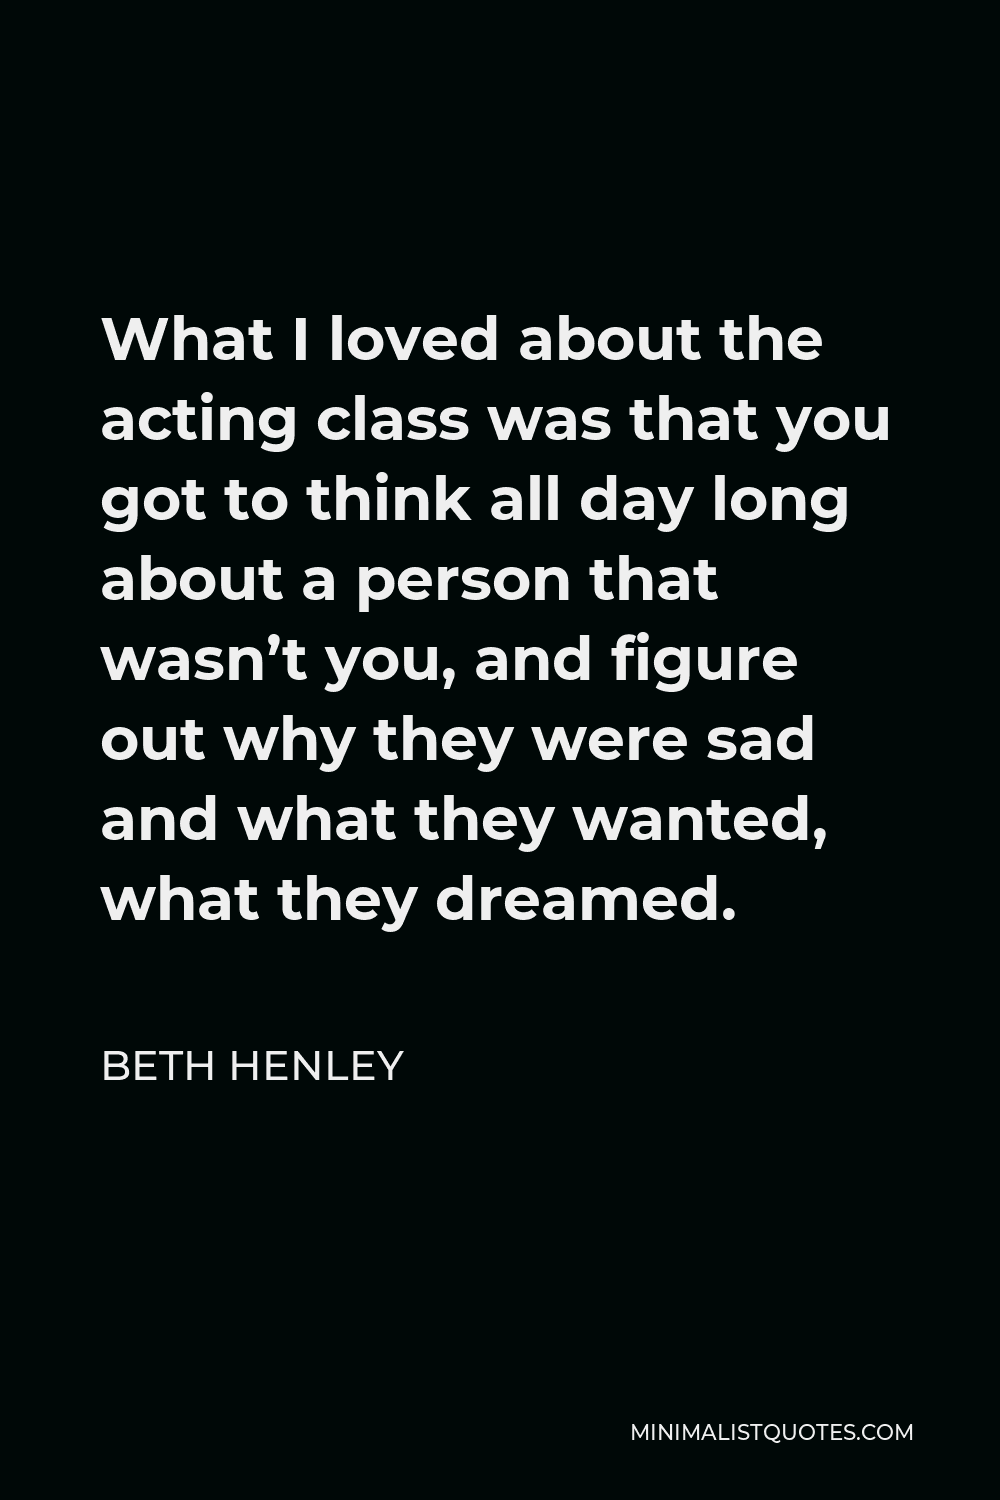 Beth Henley Quote - What I loved about the acting class was that you got to think all day long about a person that wasn’t you, and figure out why they were sad and what they wanted, what they dreamed.